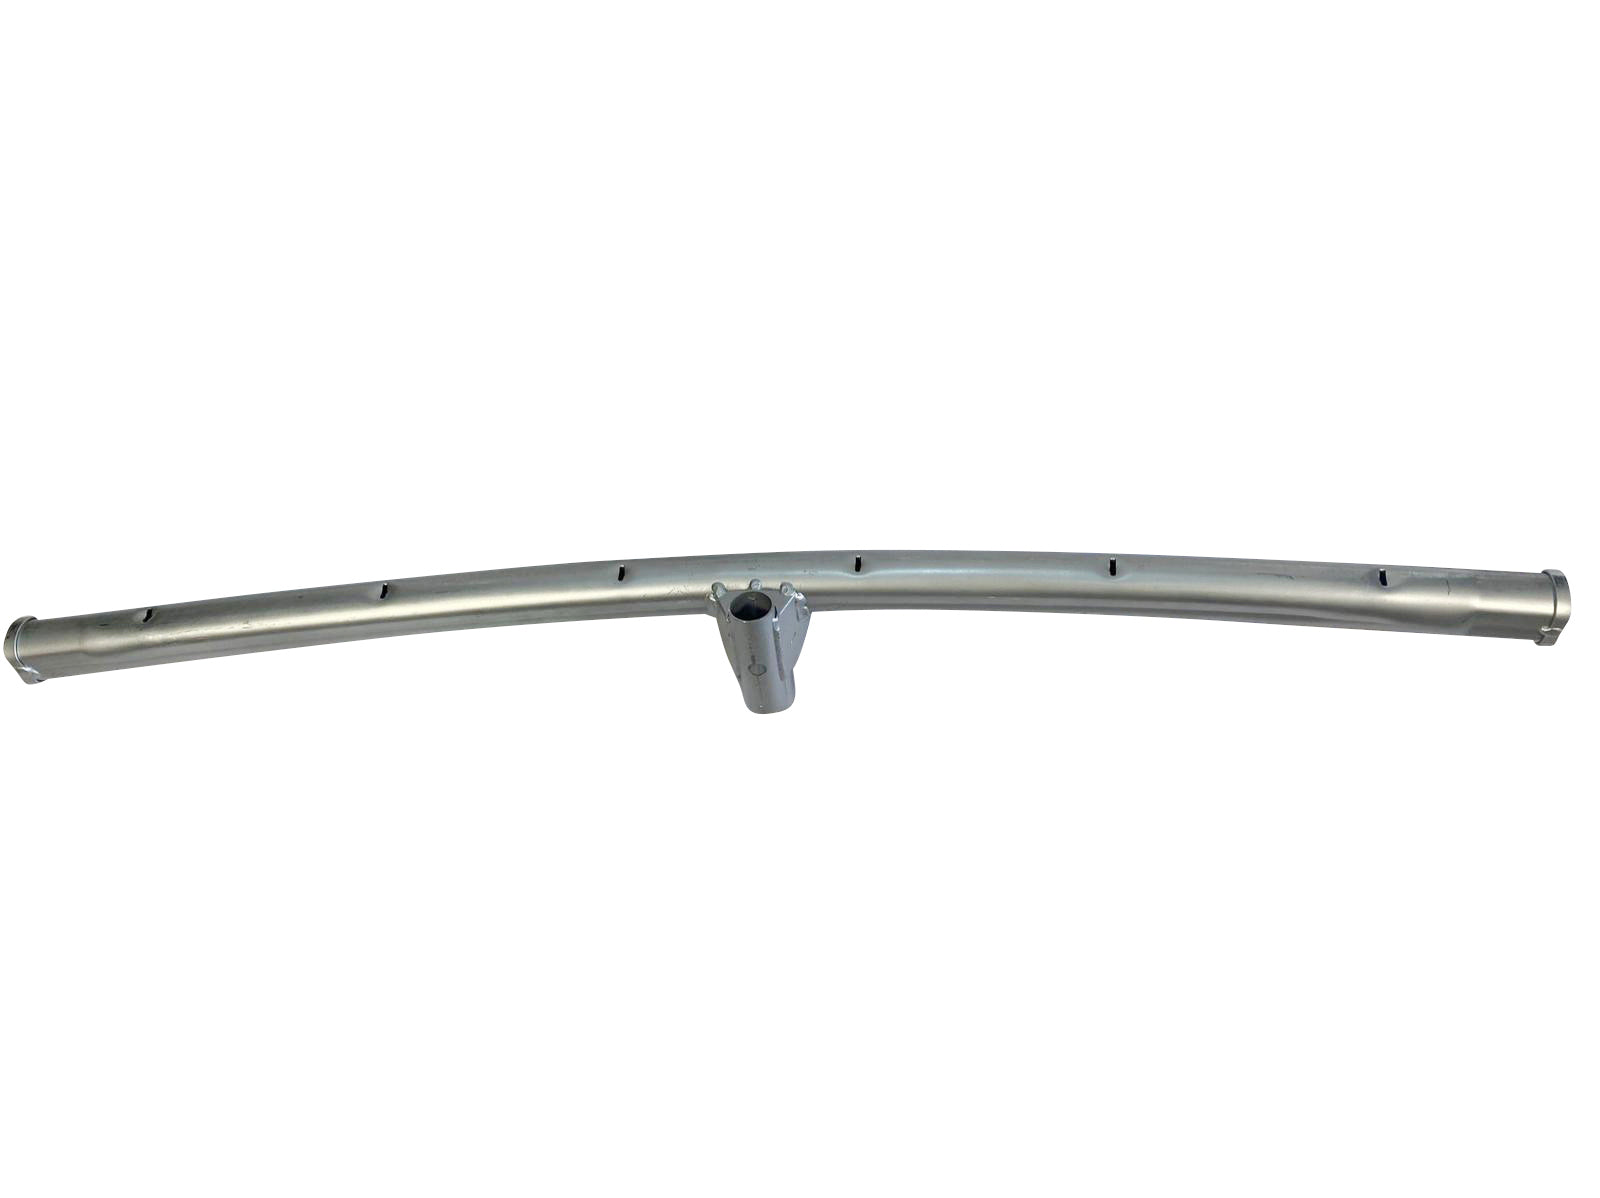 Ultima 5 12ft x 8ft Rectangular Trampoline Part Number 26 - Curved Top Rail with Leg Socket (Middle)